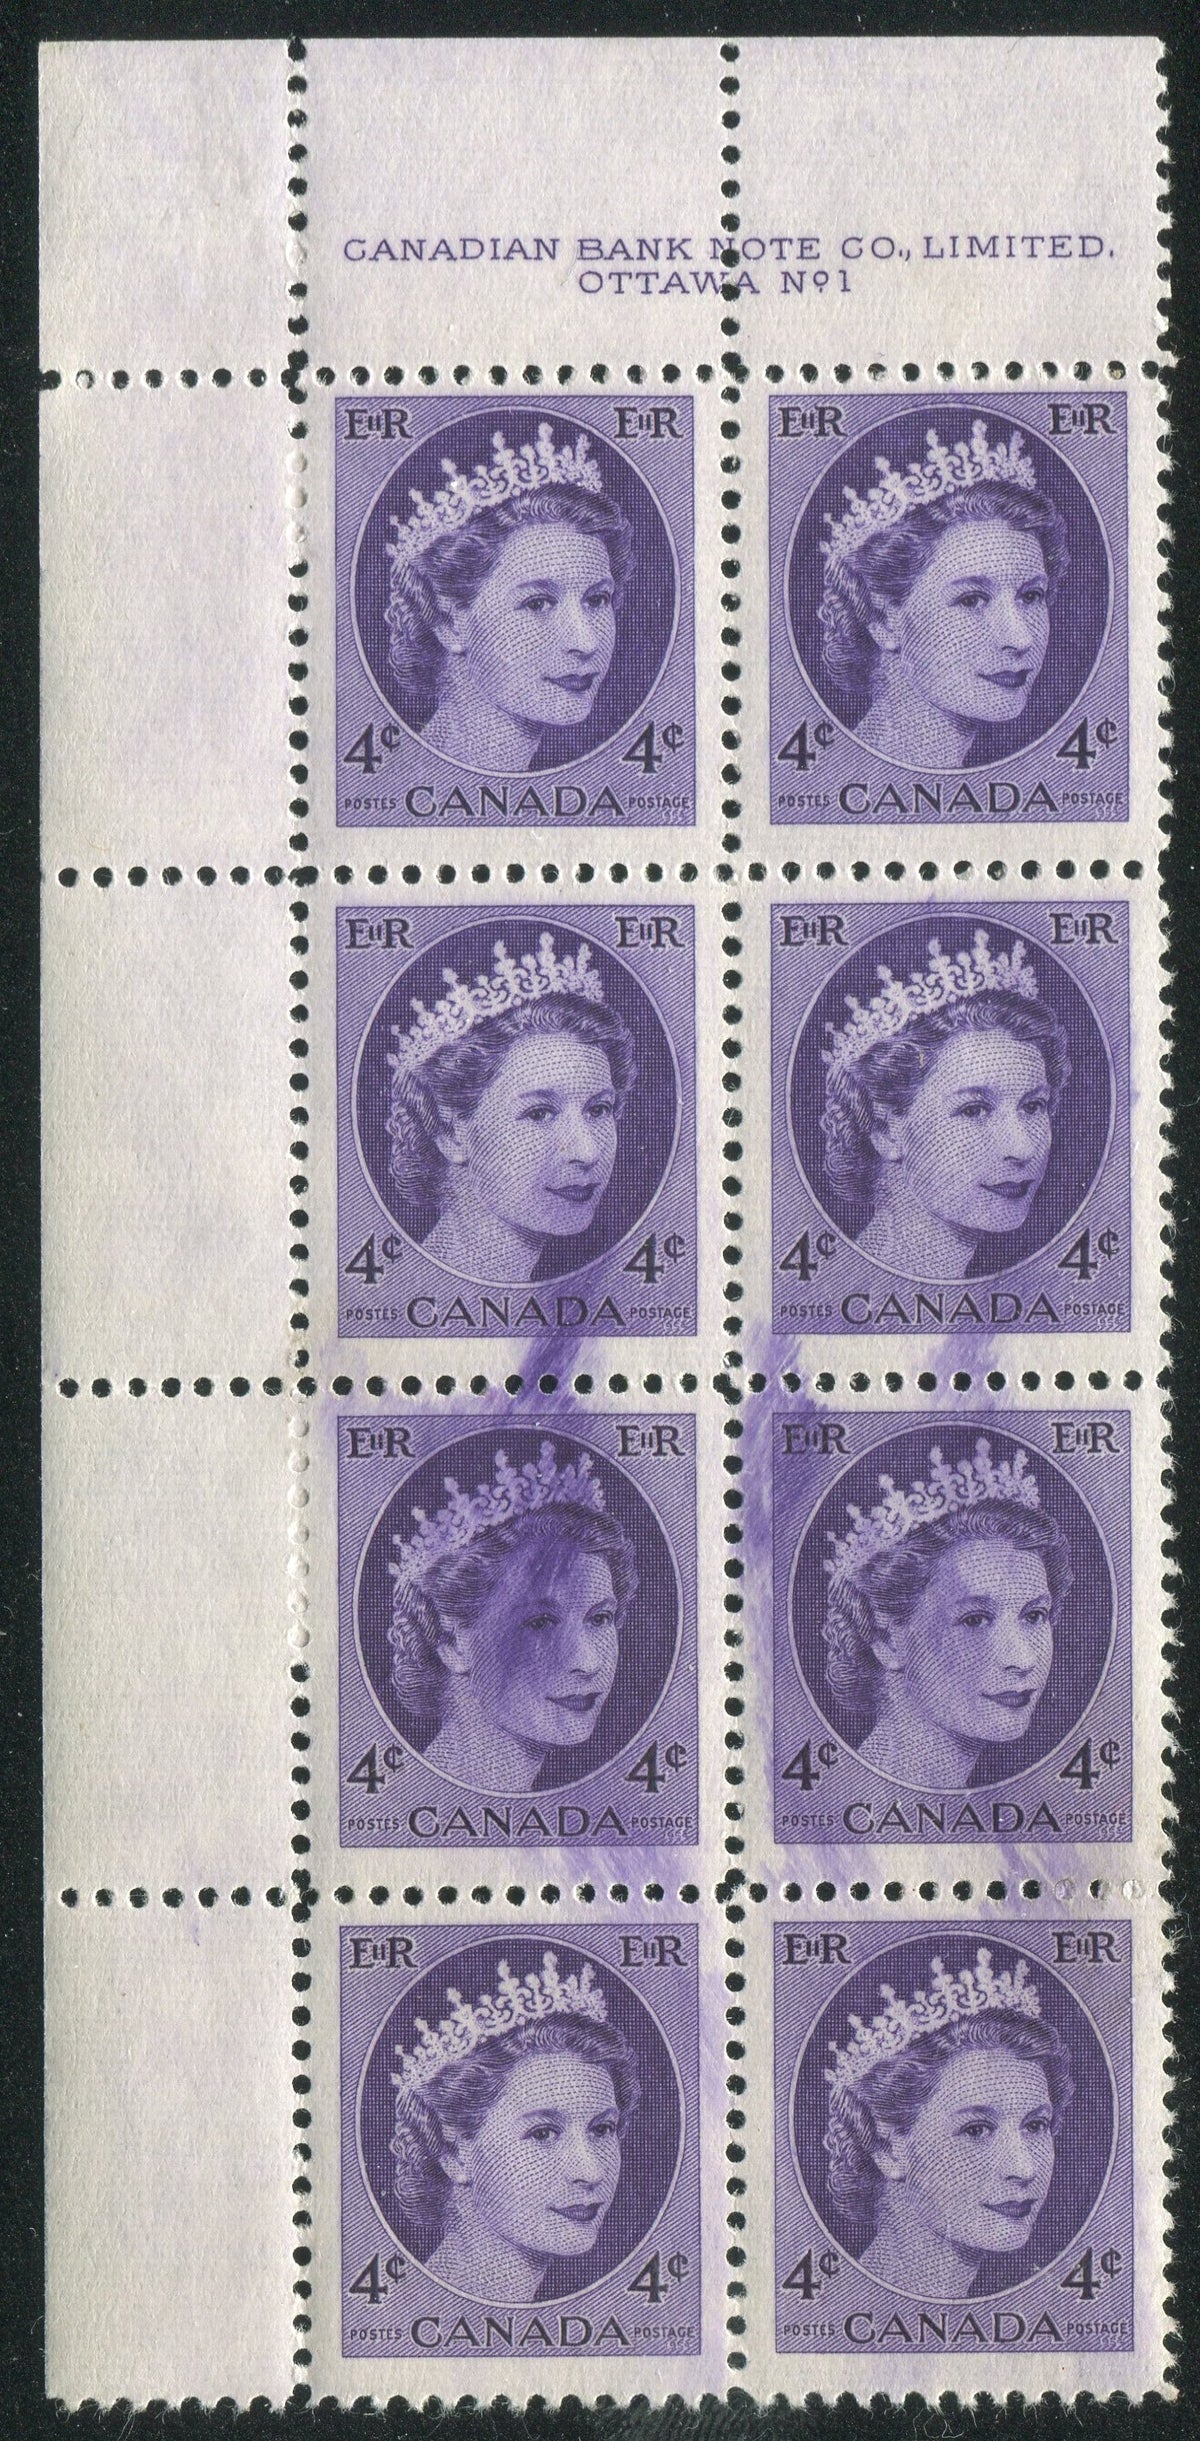 0340CA1902 - Canada #340 - Mint Ink Smear Plate Block of 8